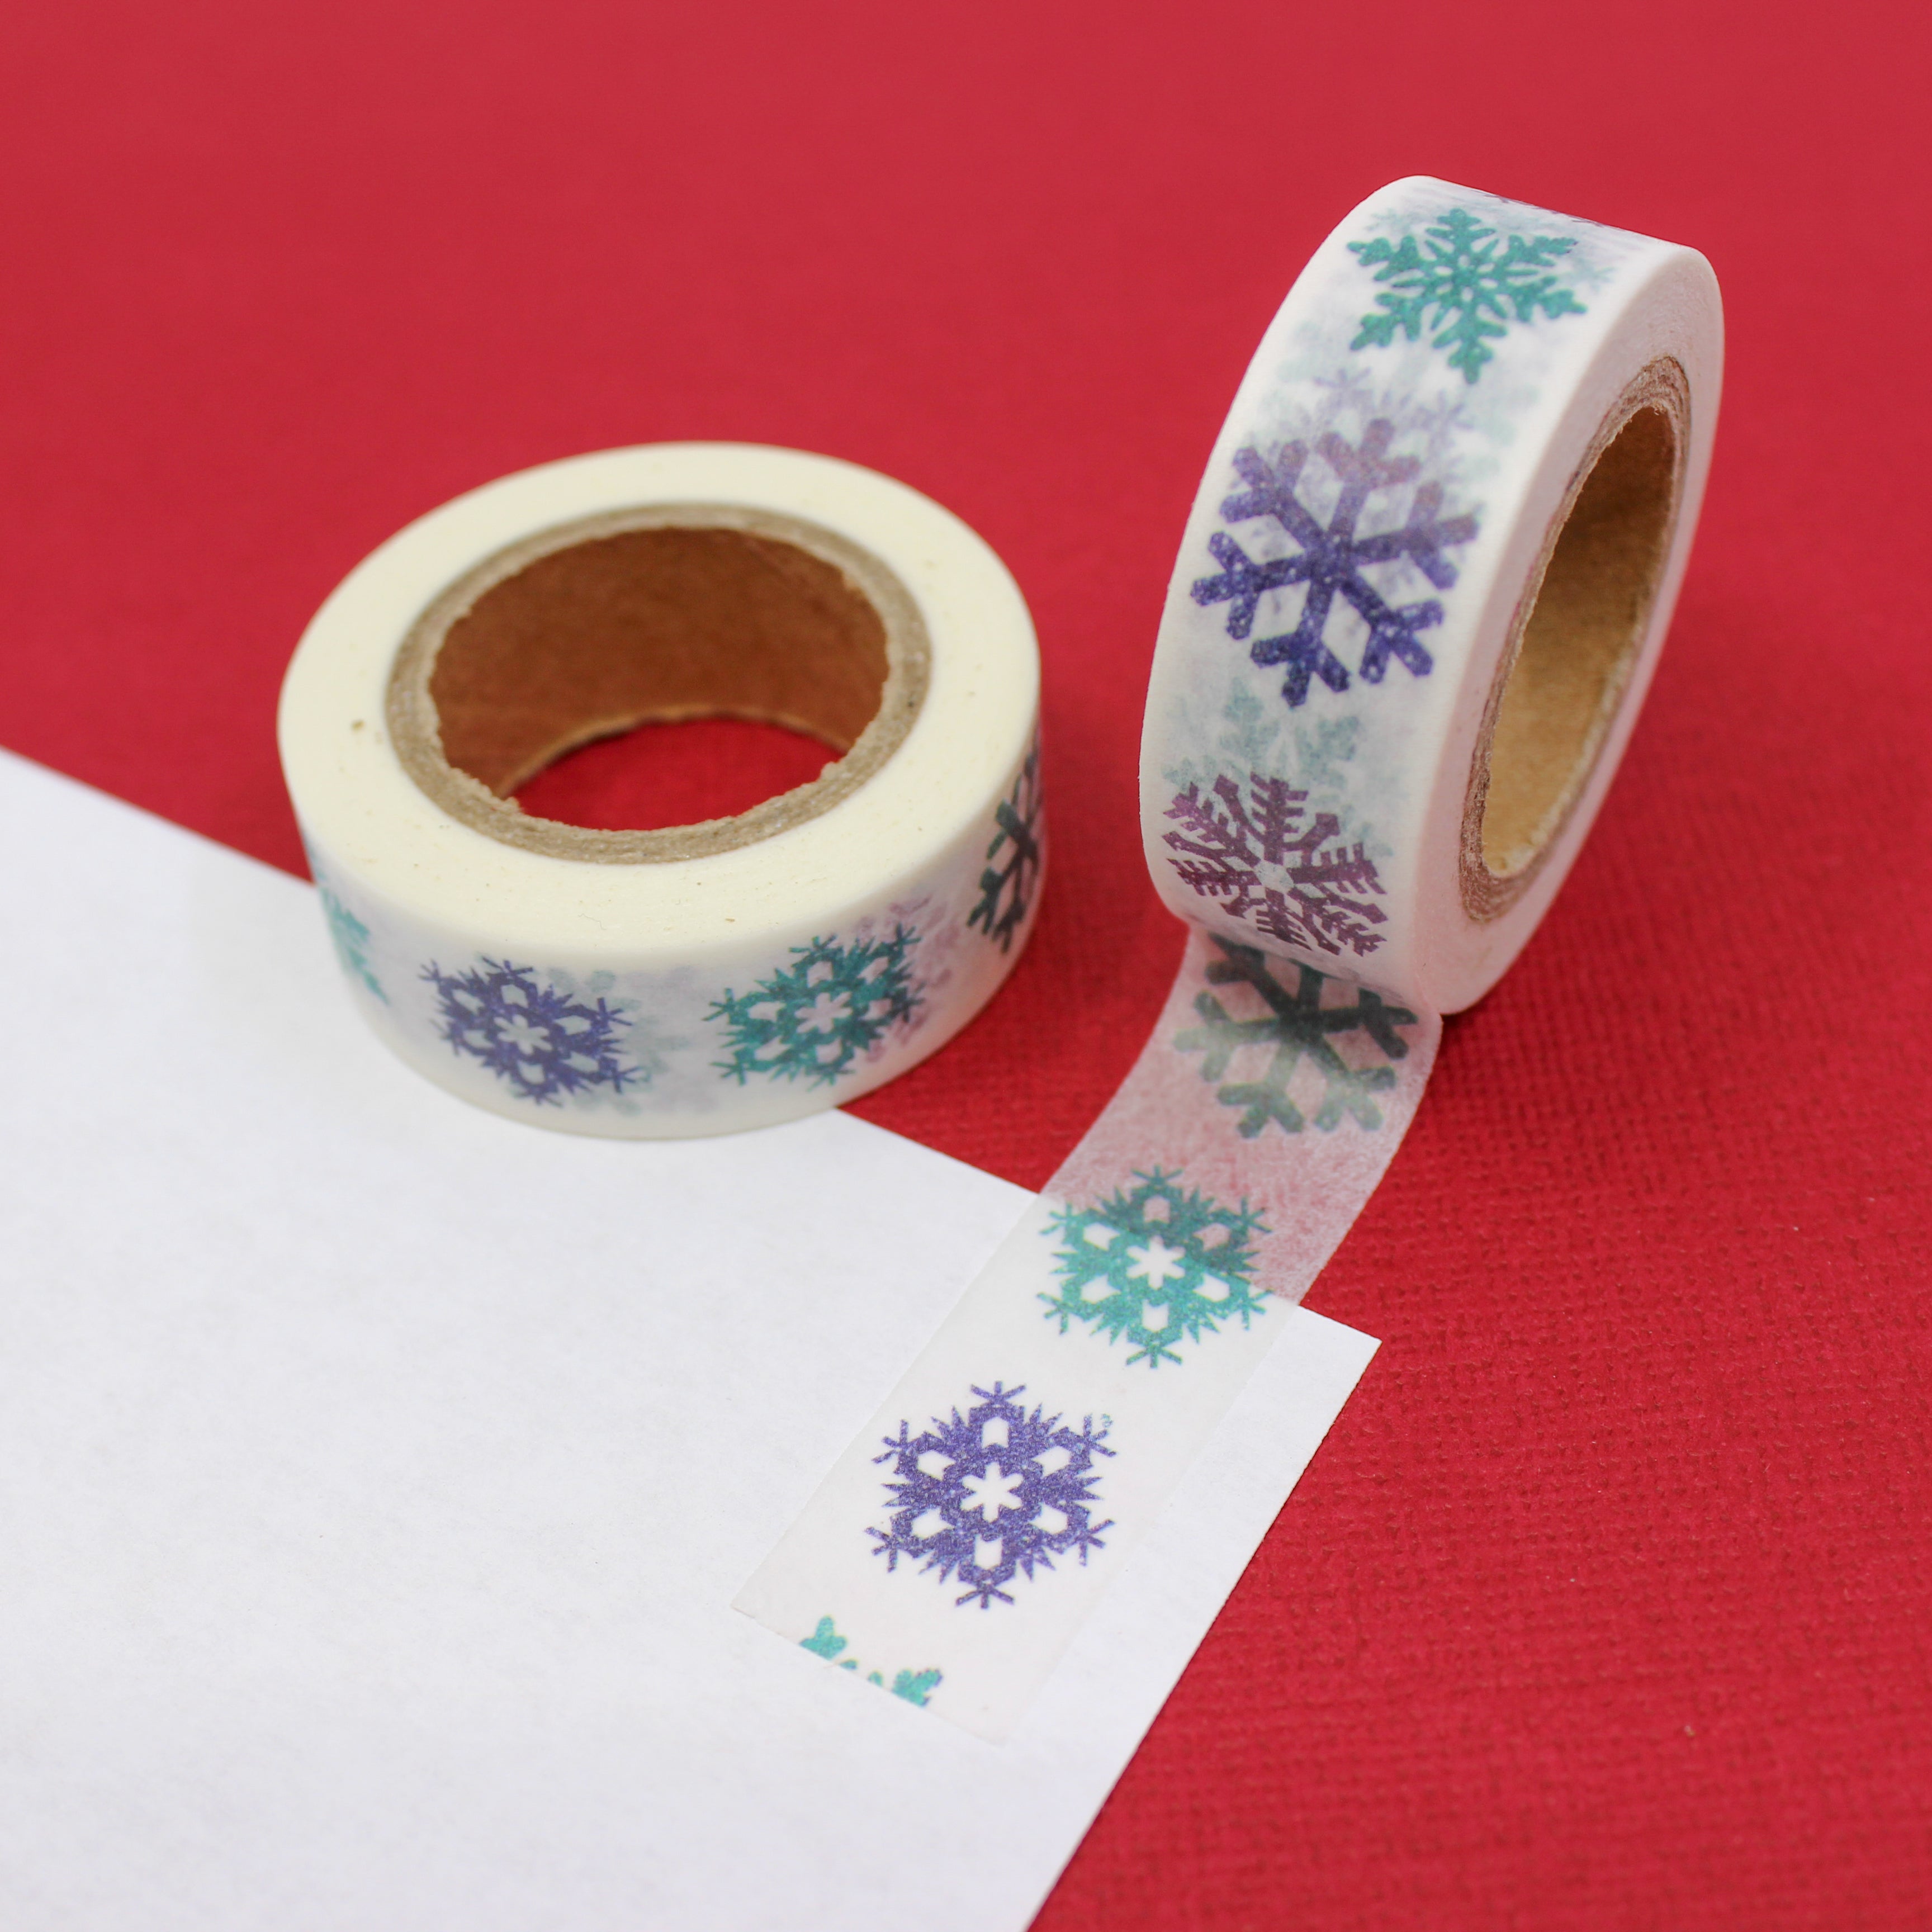 This is a blue and purple snowflakes view themed washi tape from BBB Supplies Craft Shop